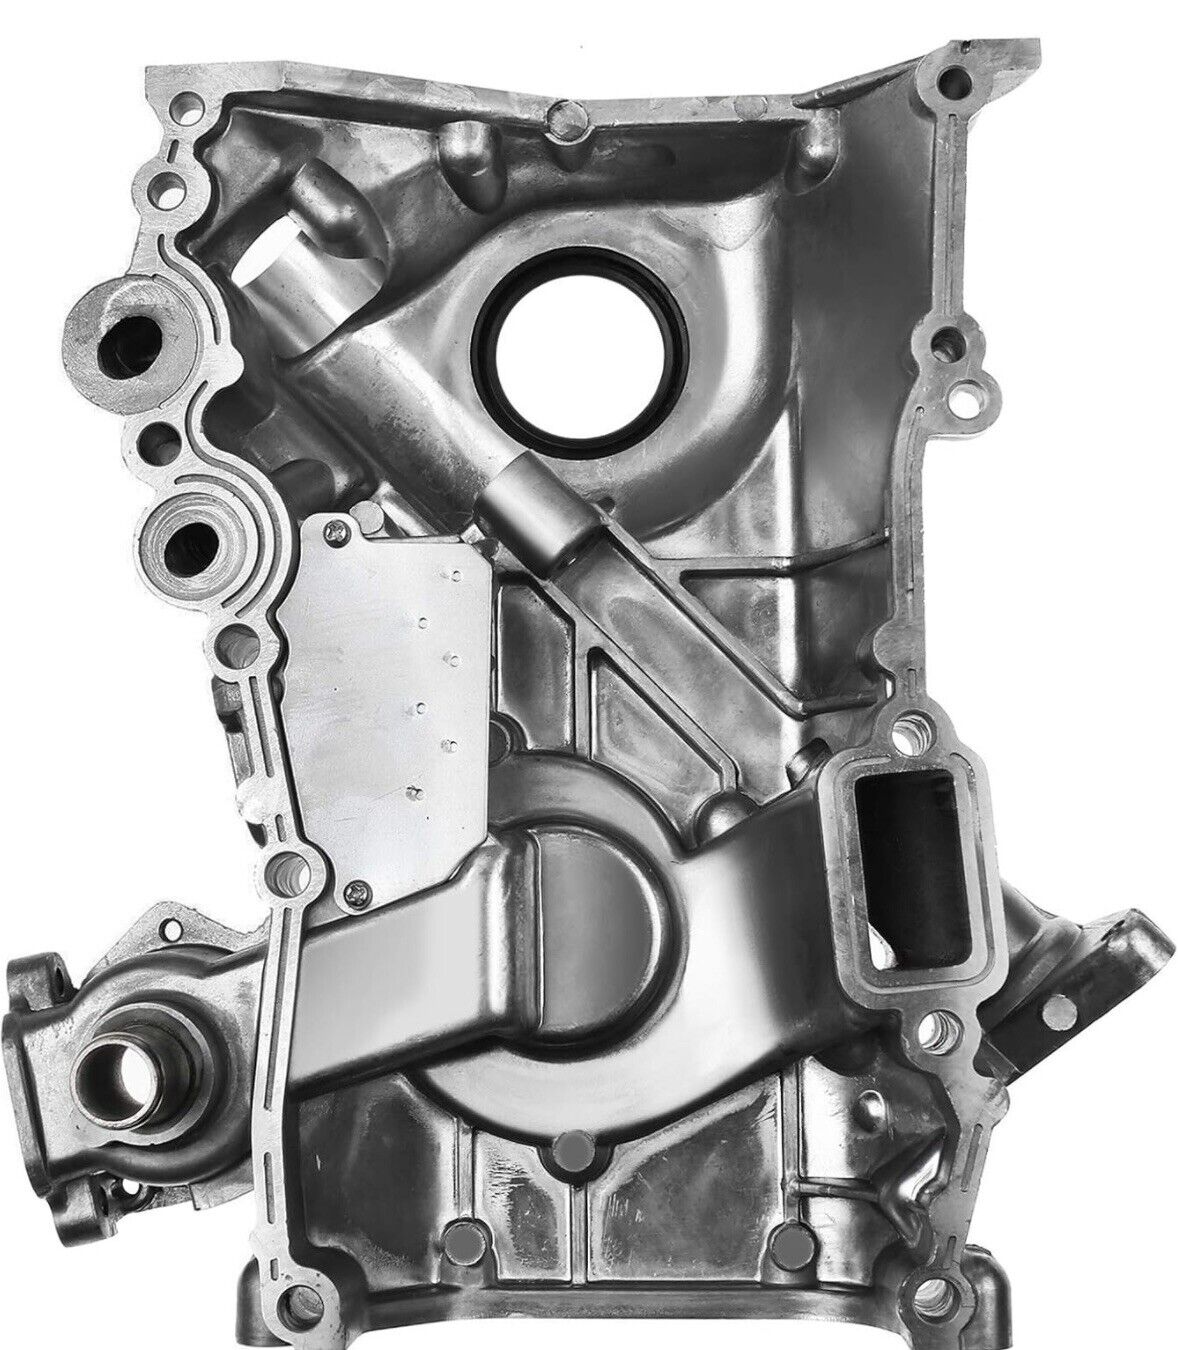 New Engine Timing Chain Front Cover for Nissan Hardbody Pickup L4 2.4L 1996 1997